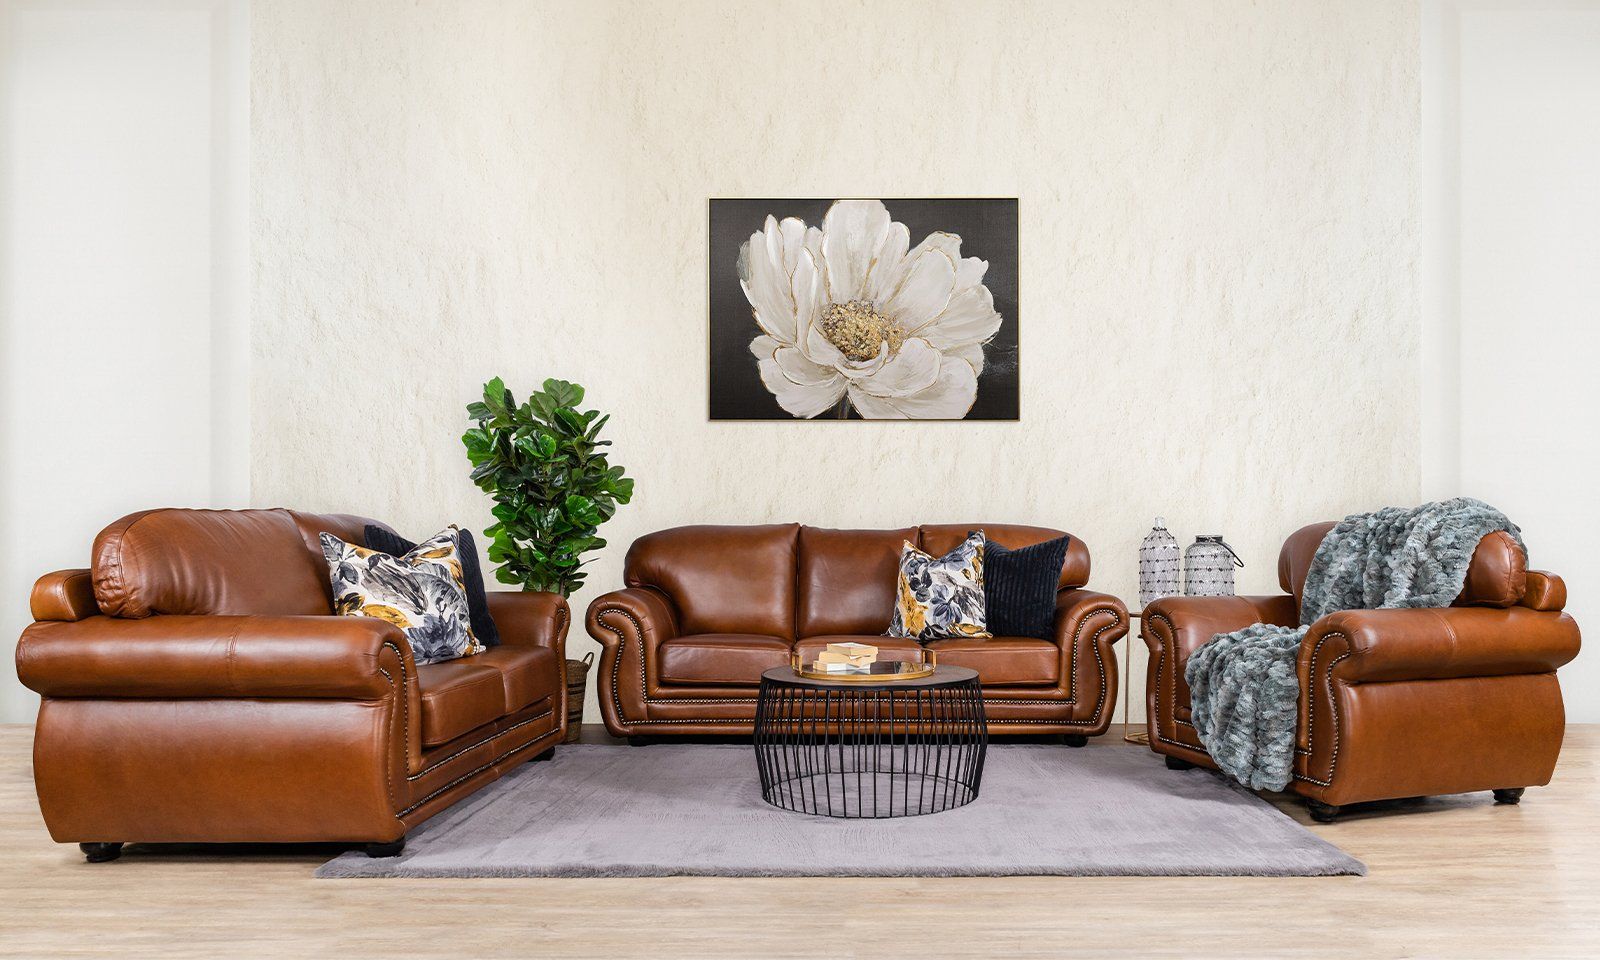 HOW TO STYLE A THROW ON YOUR COUCH